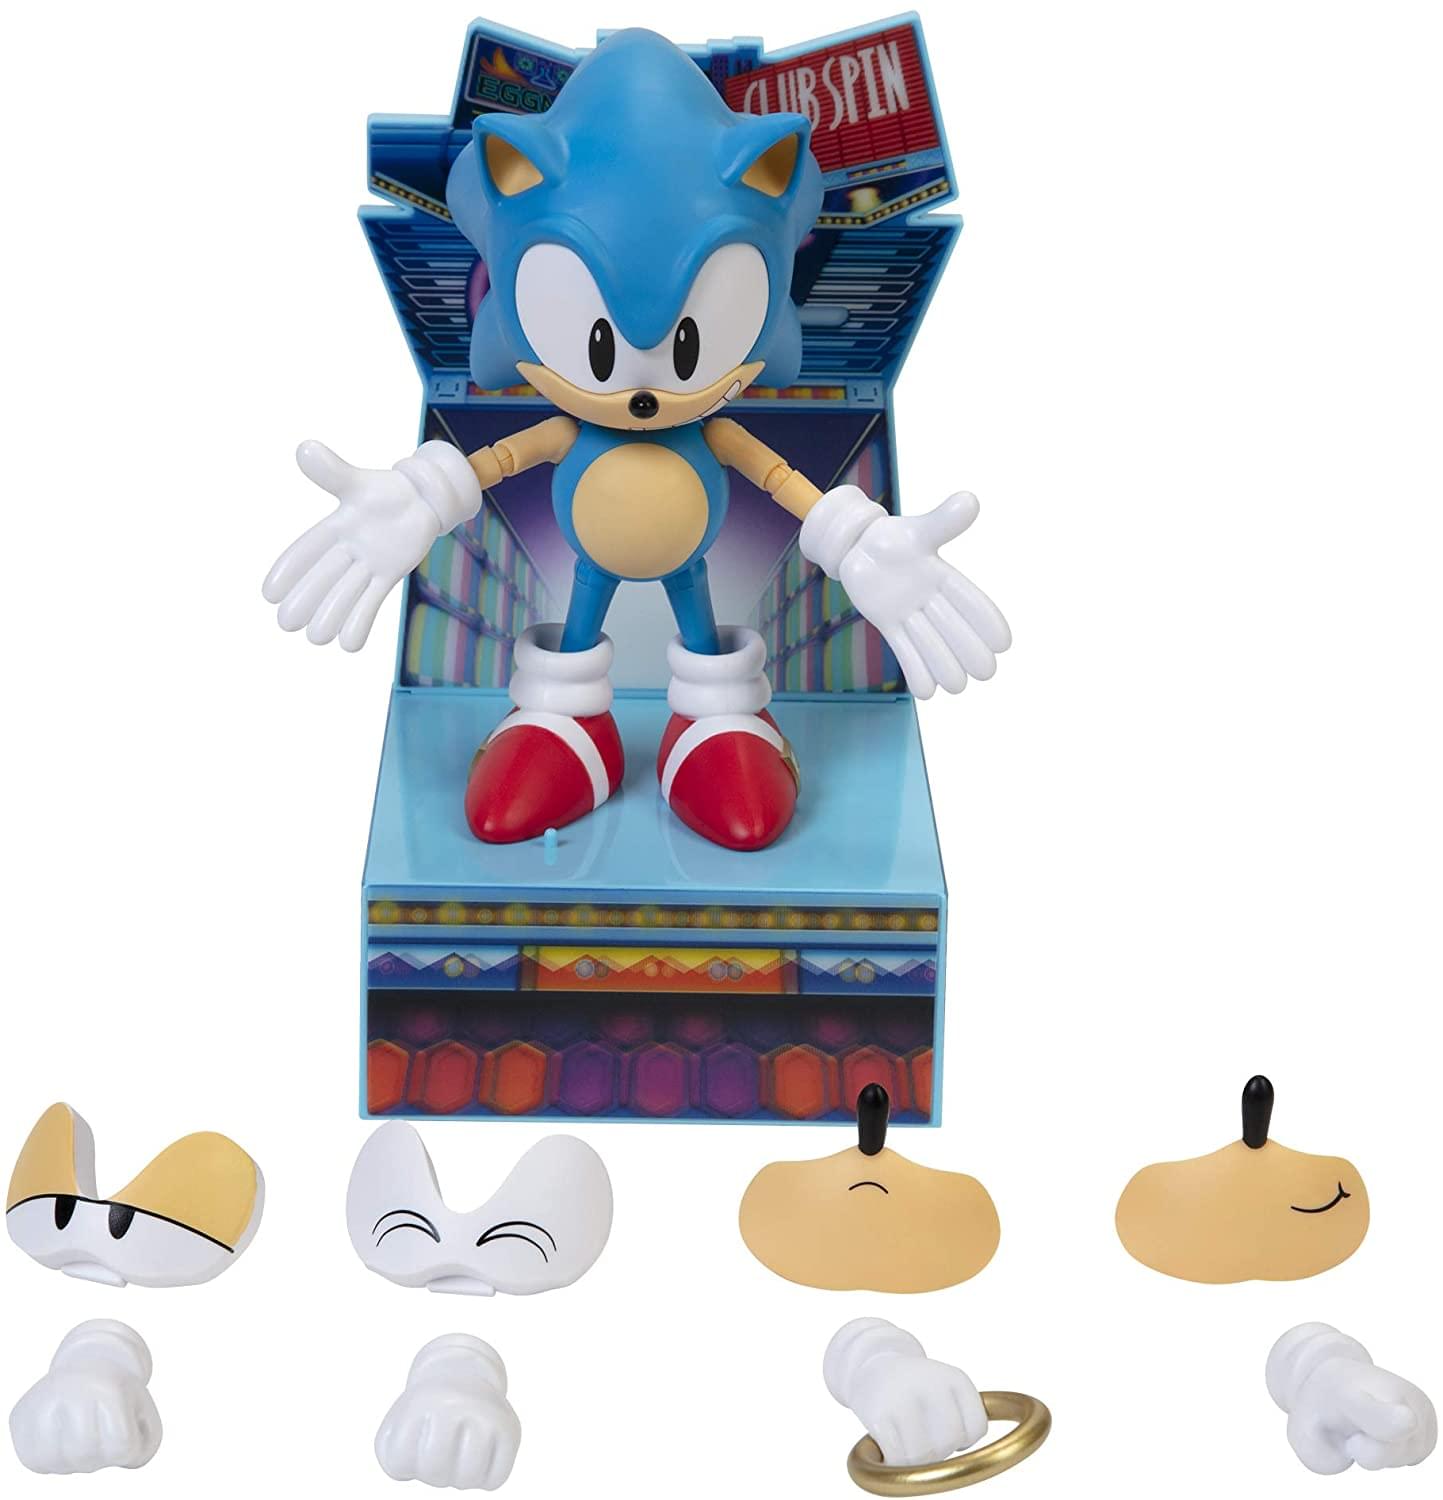 Sonic the Hedgehog 6 Inch Collector Edition Action Figure